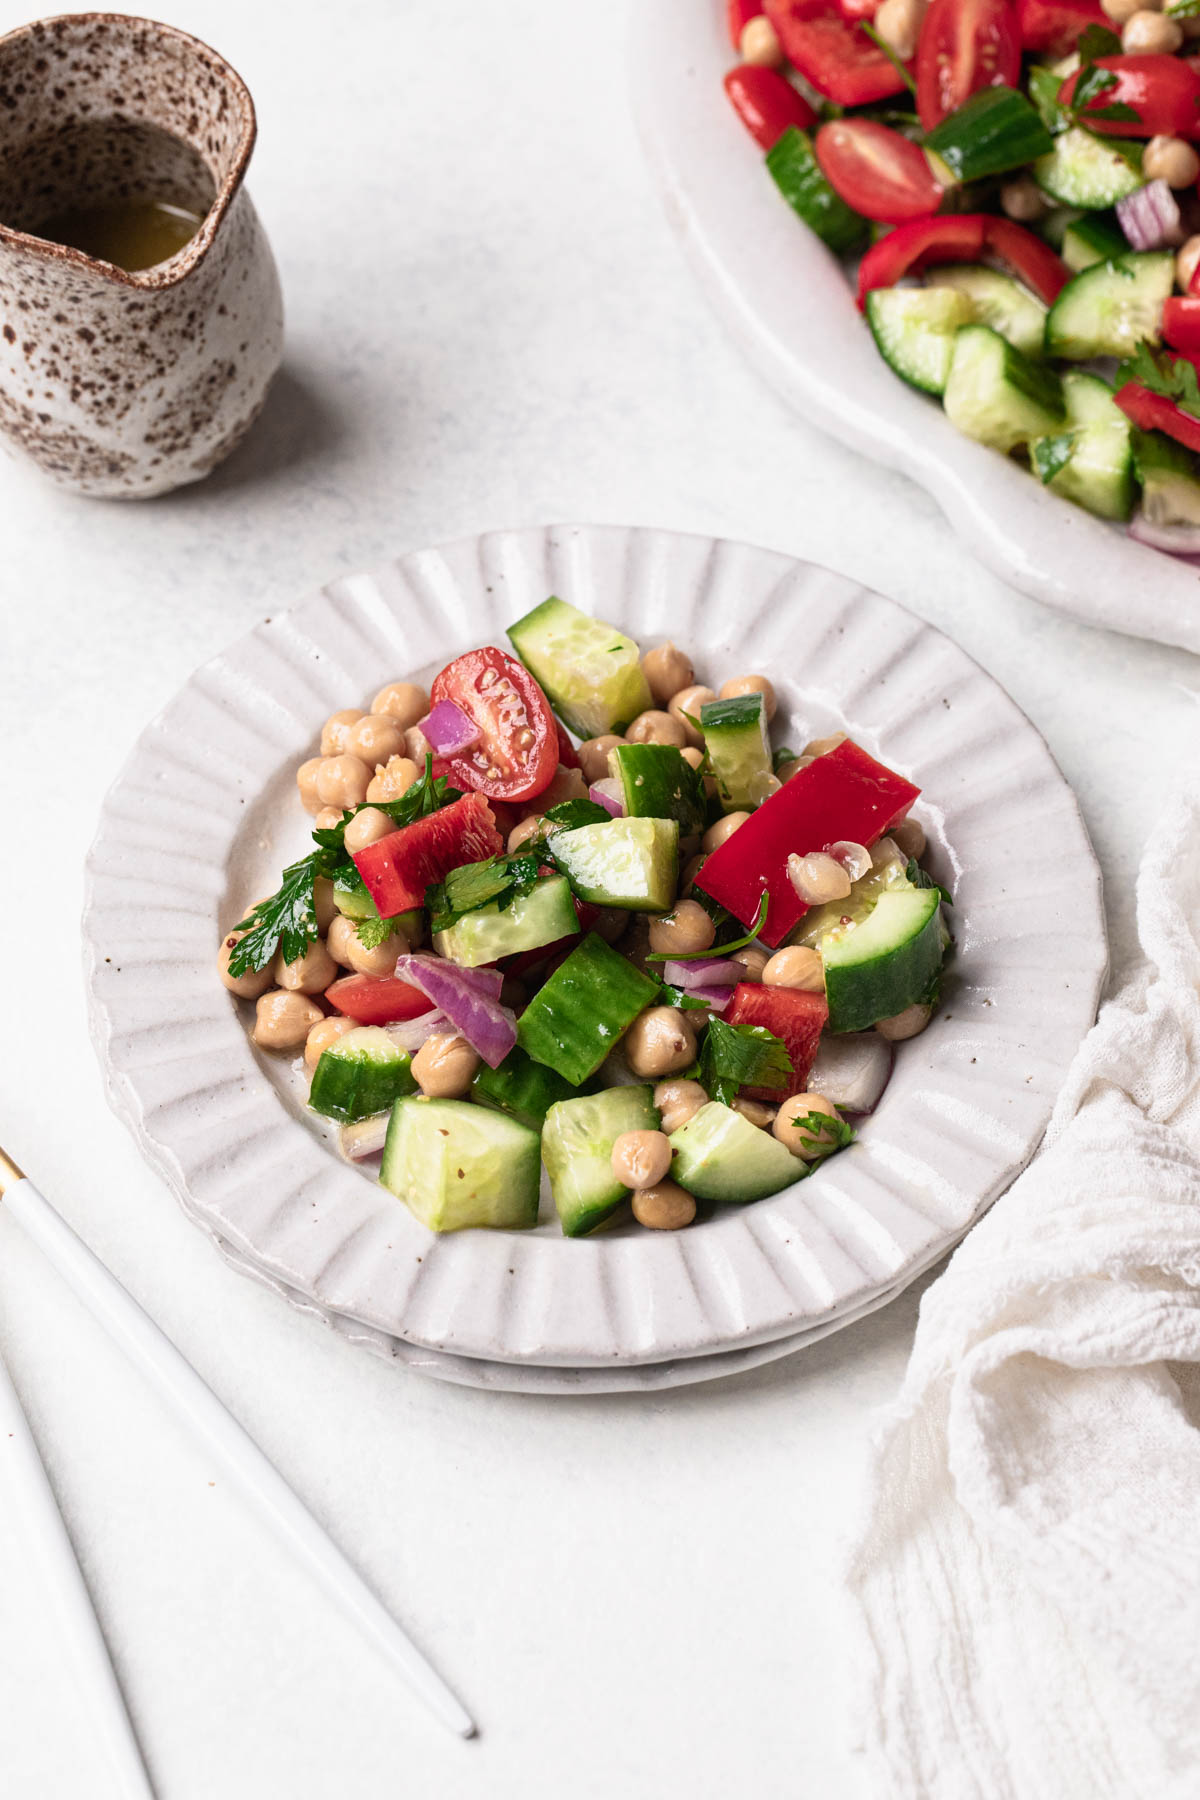 No Lettuce Chopped Salad of cucumber, cherry tomato, capsicum, red onion and chickpeas on a small white ridged plate